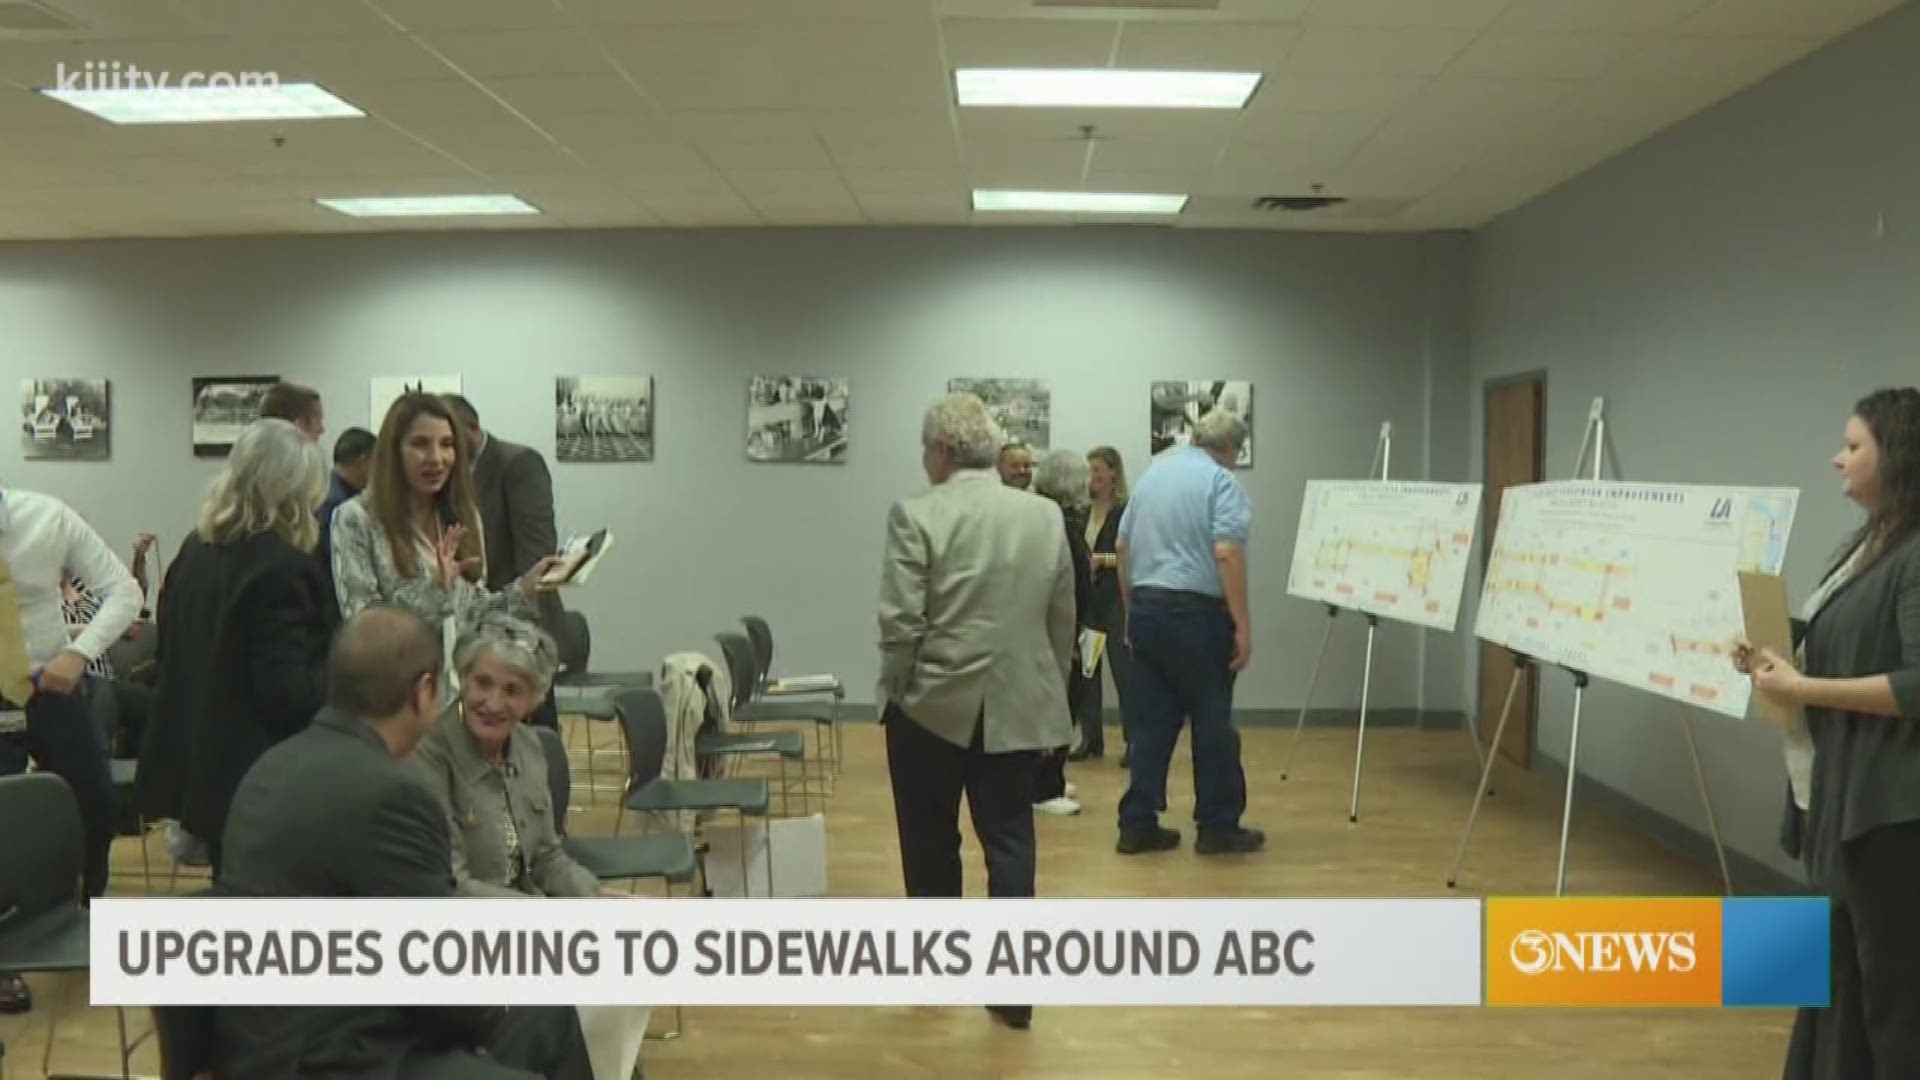 Coastal Bend residents got to voice their ideas Monday on improving the area in the SEA District of downtown Corpus Christi.